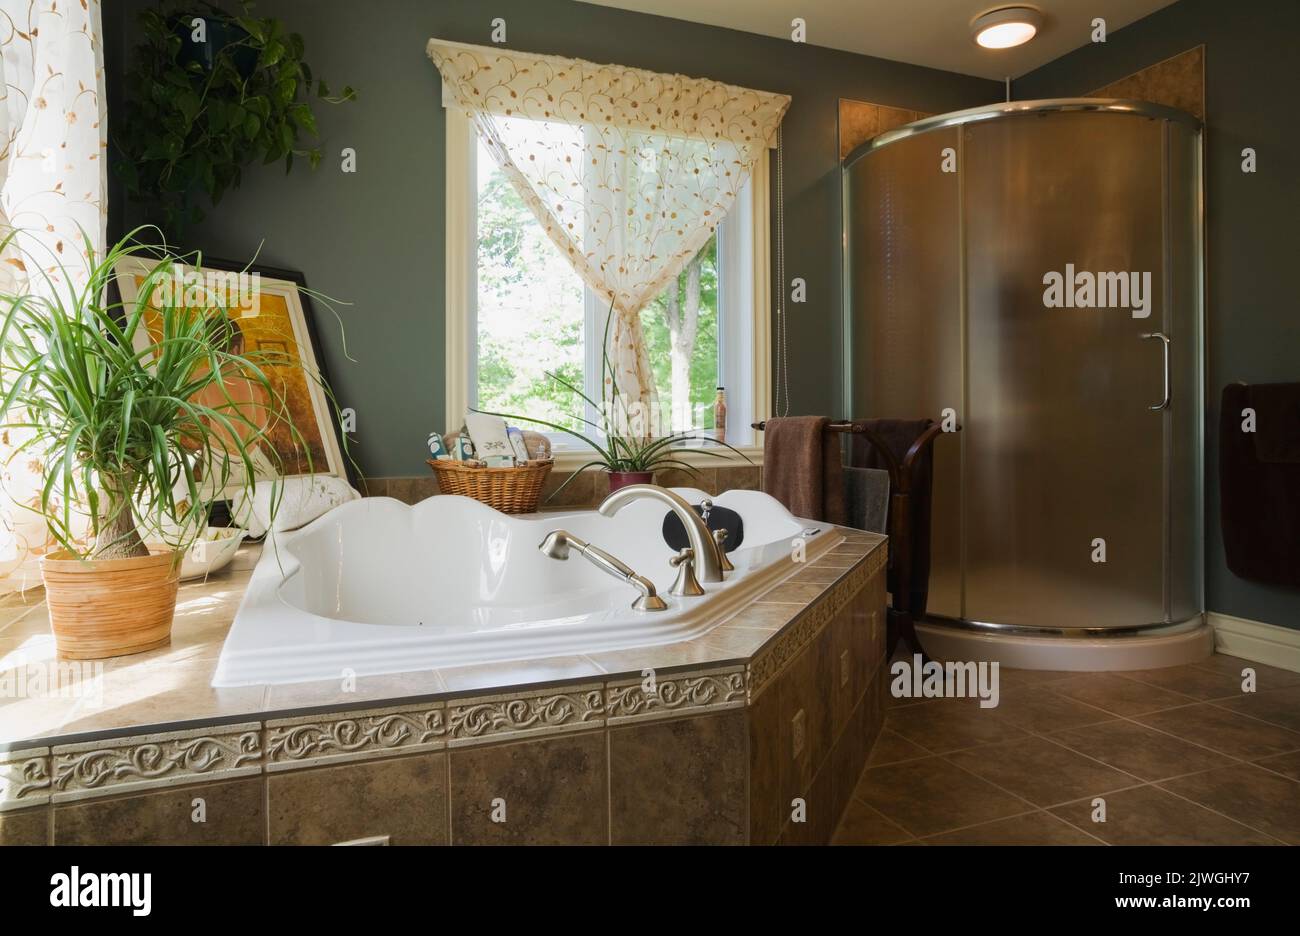 Main bathroom with whirlpool bathtub and glass shower stall inside cottage style home. Stock Photo